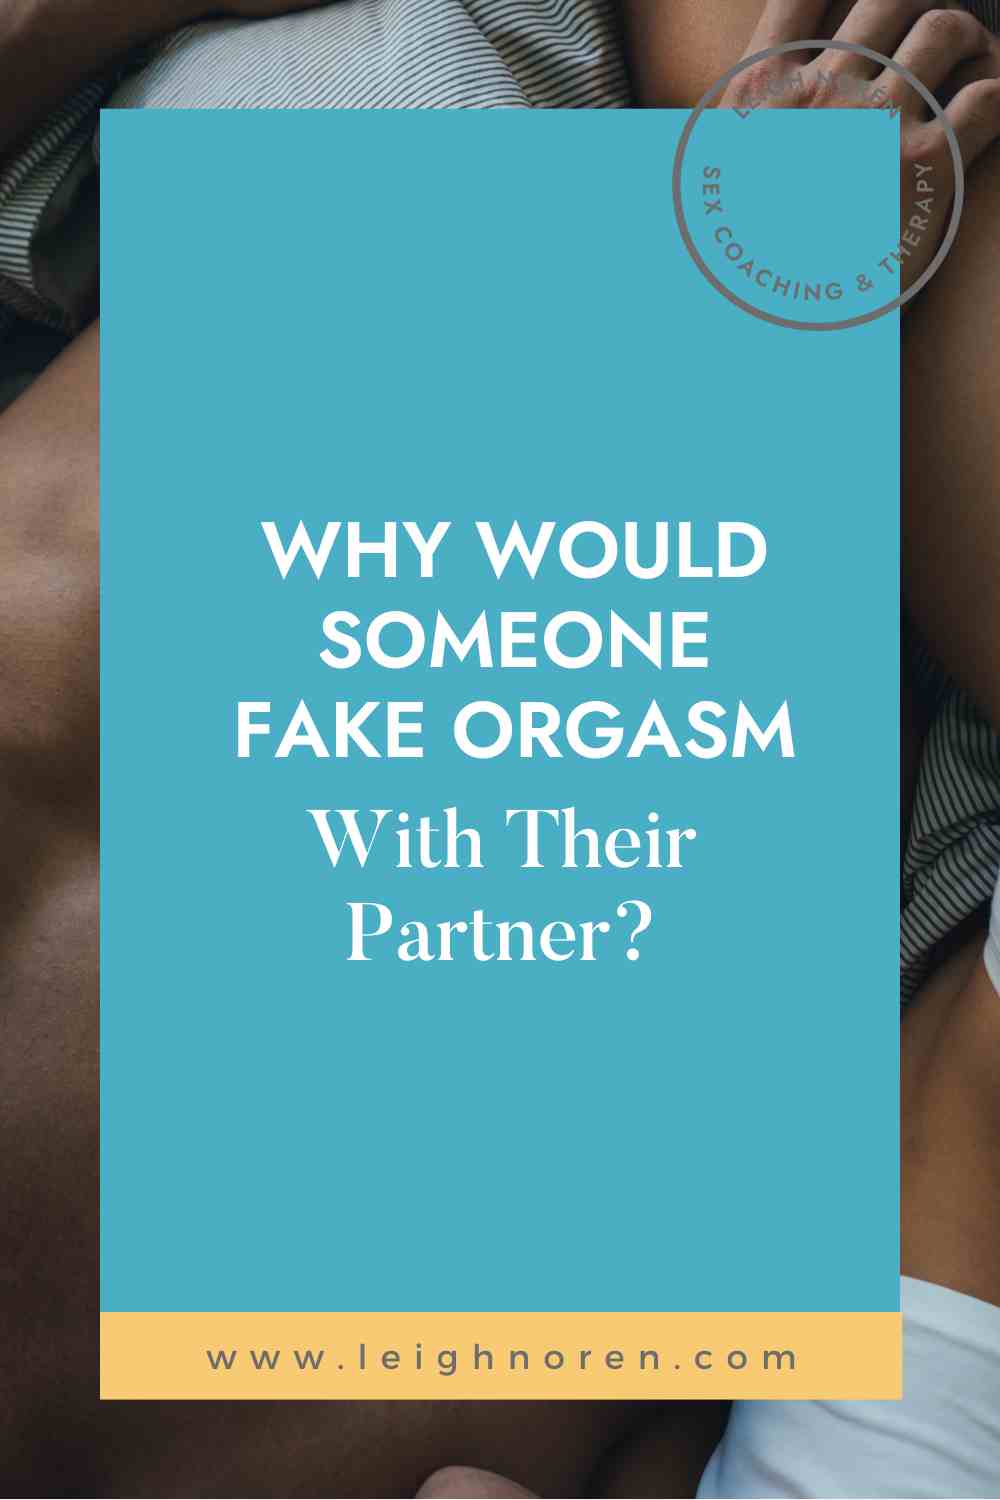 Why would someone fake orgasm with their partner?